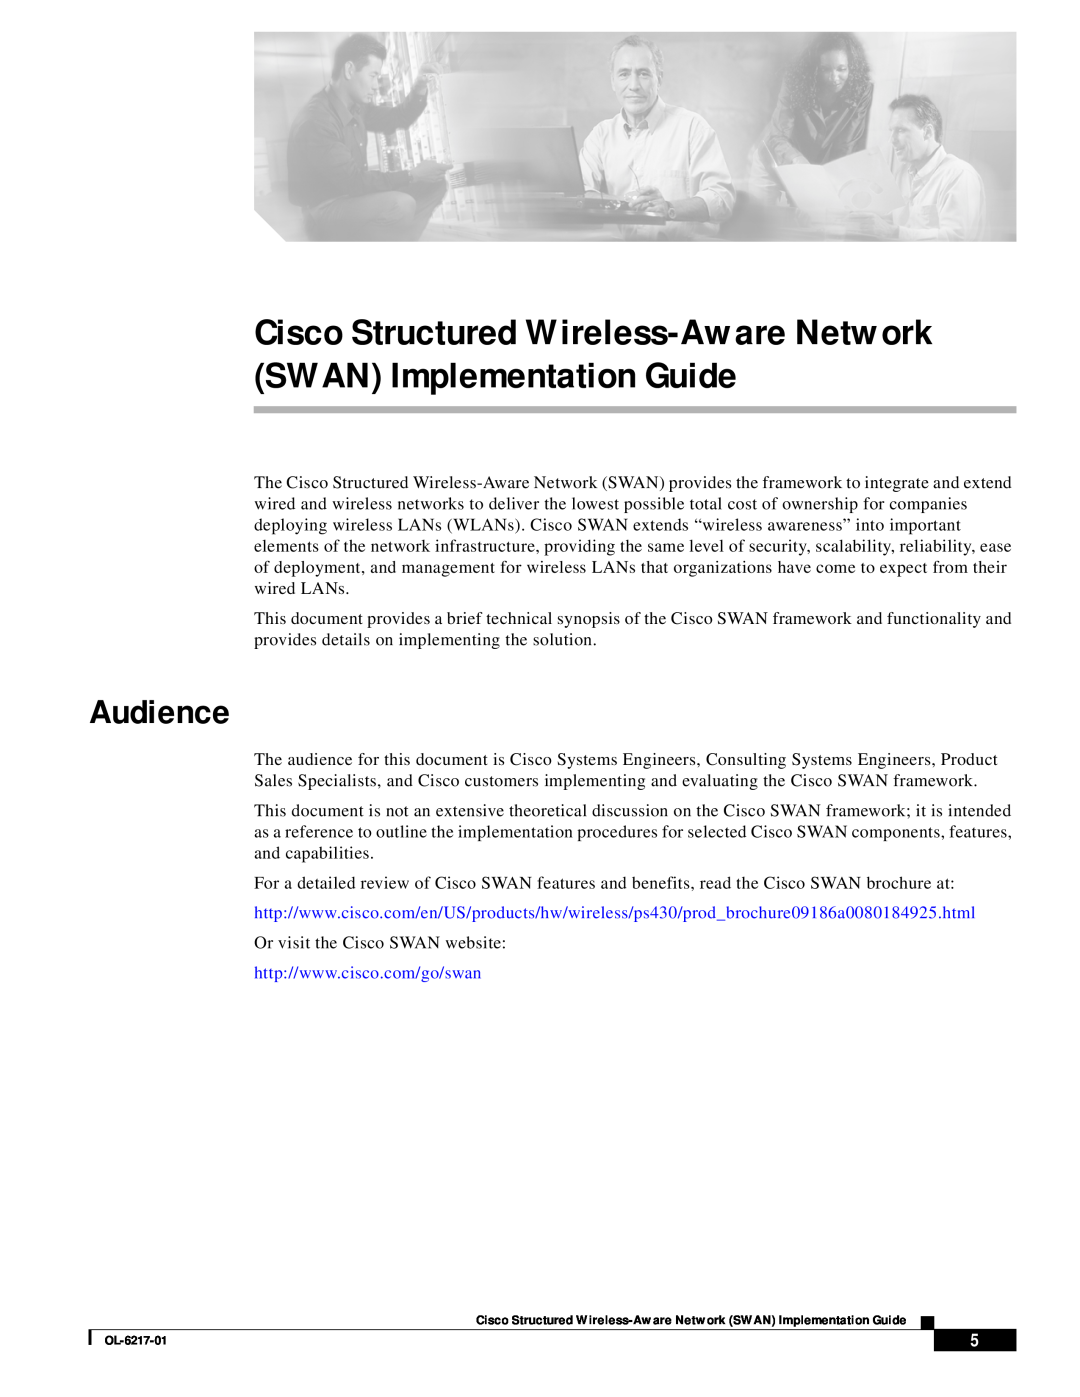 Cisco Systems OL-6217-01 manual Audience, Cisco Structured Wireless-Aware Network SWAN Implementation Guide 